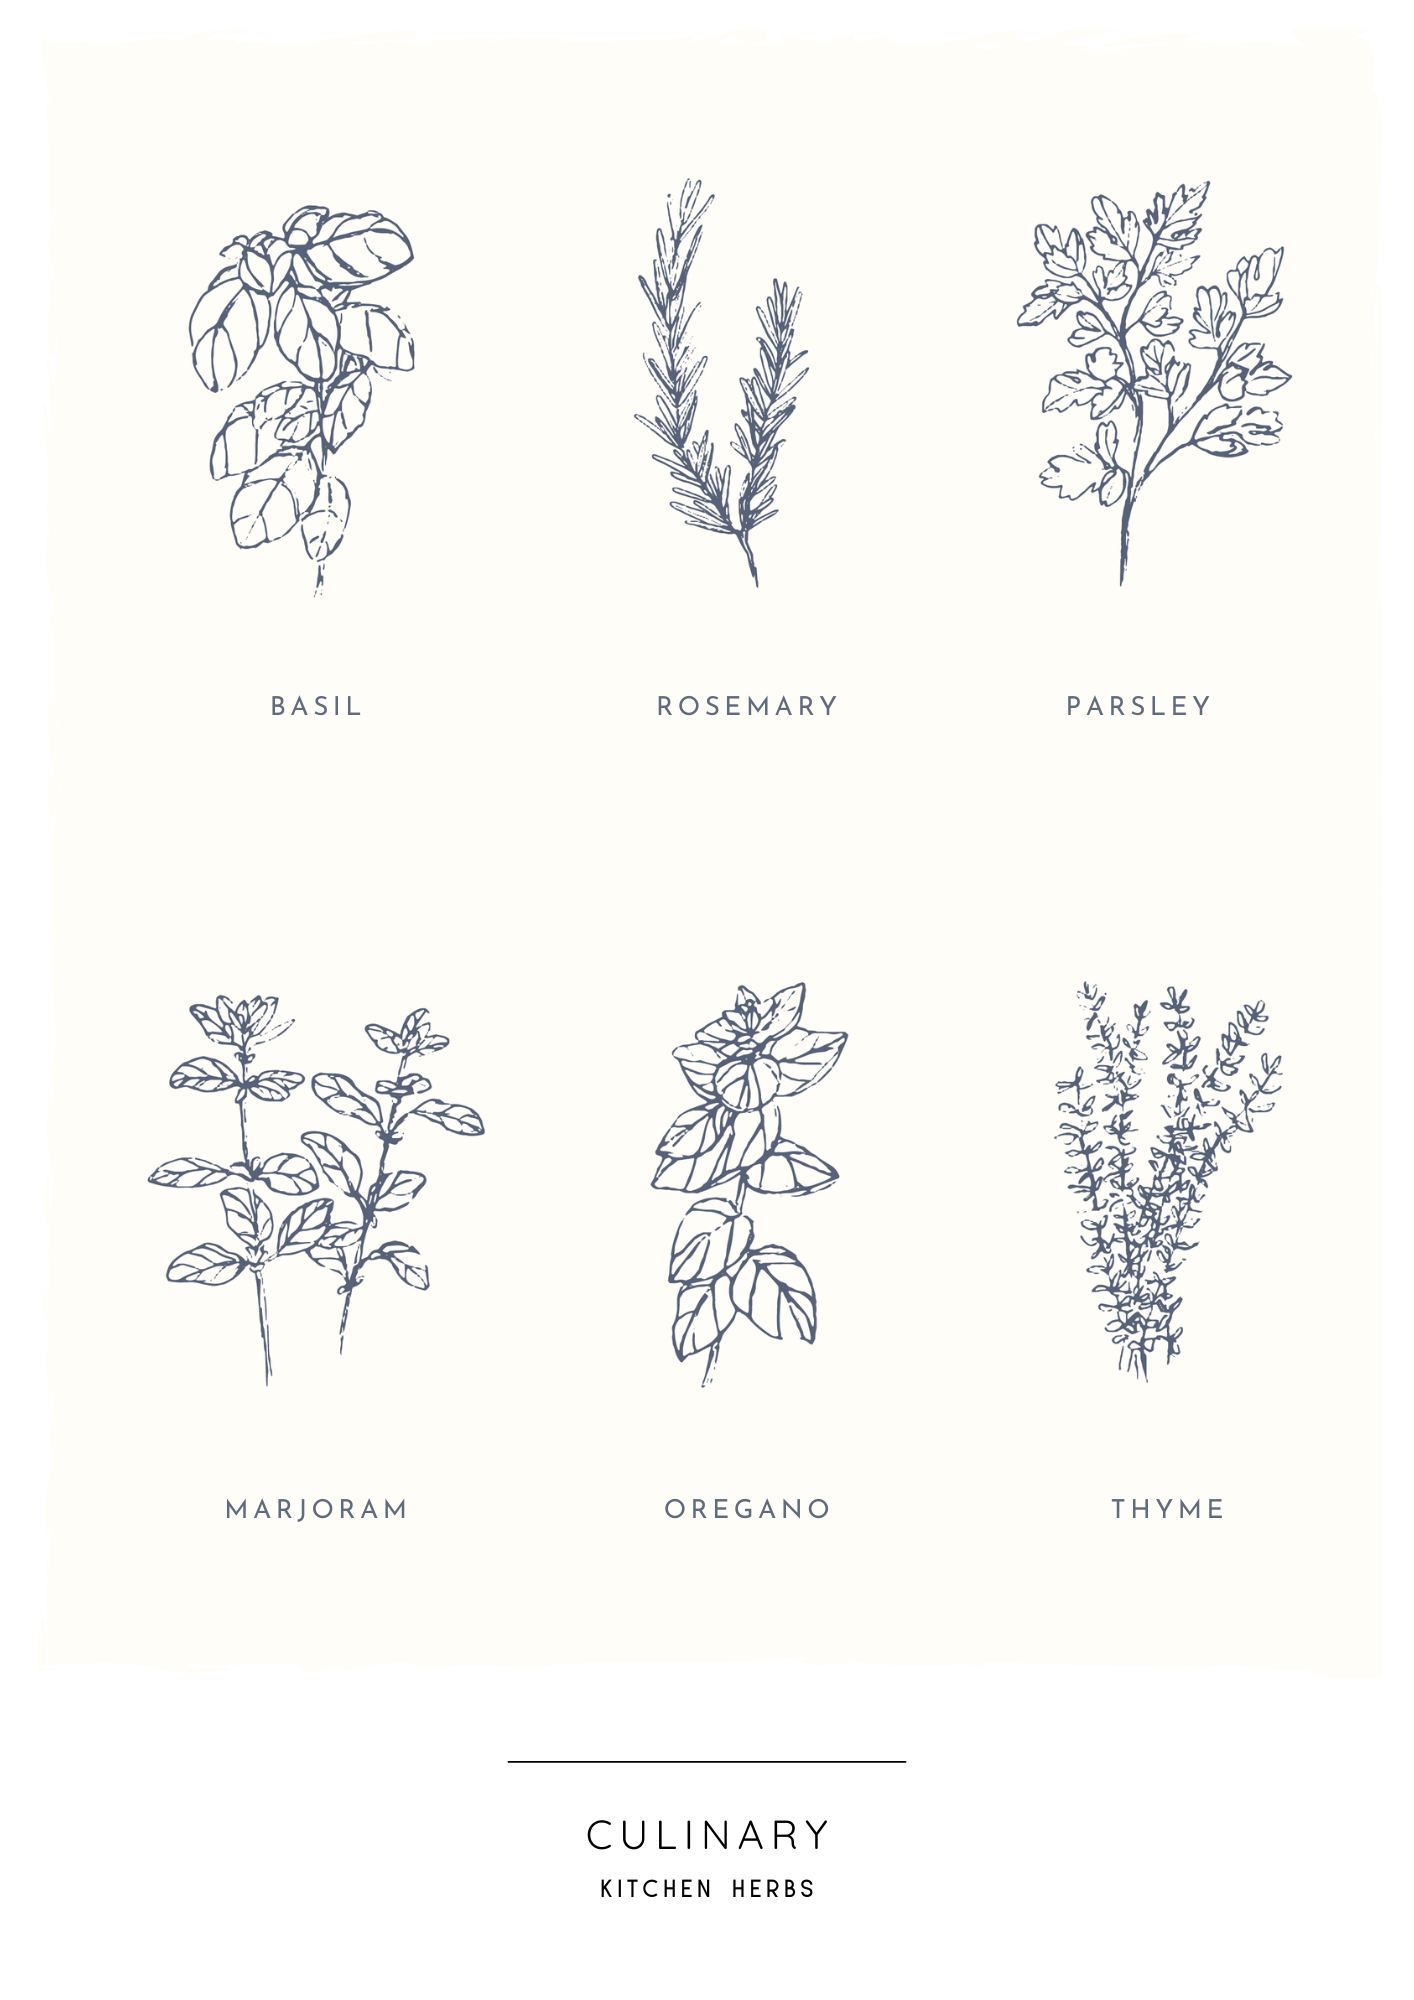 culinary herbs printable poster